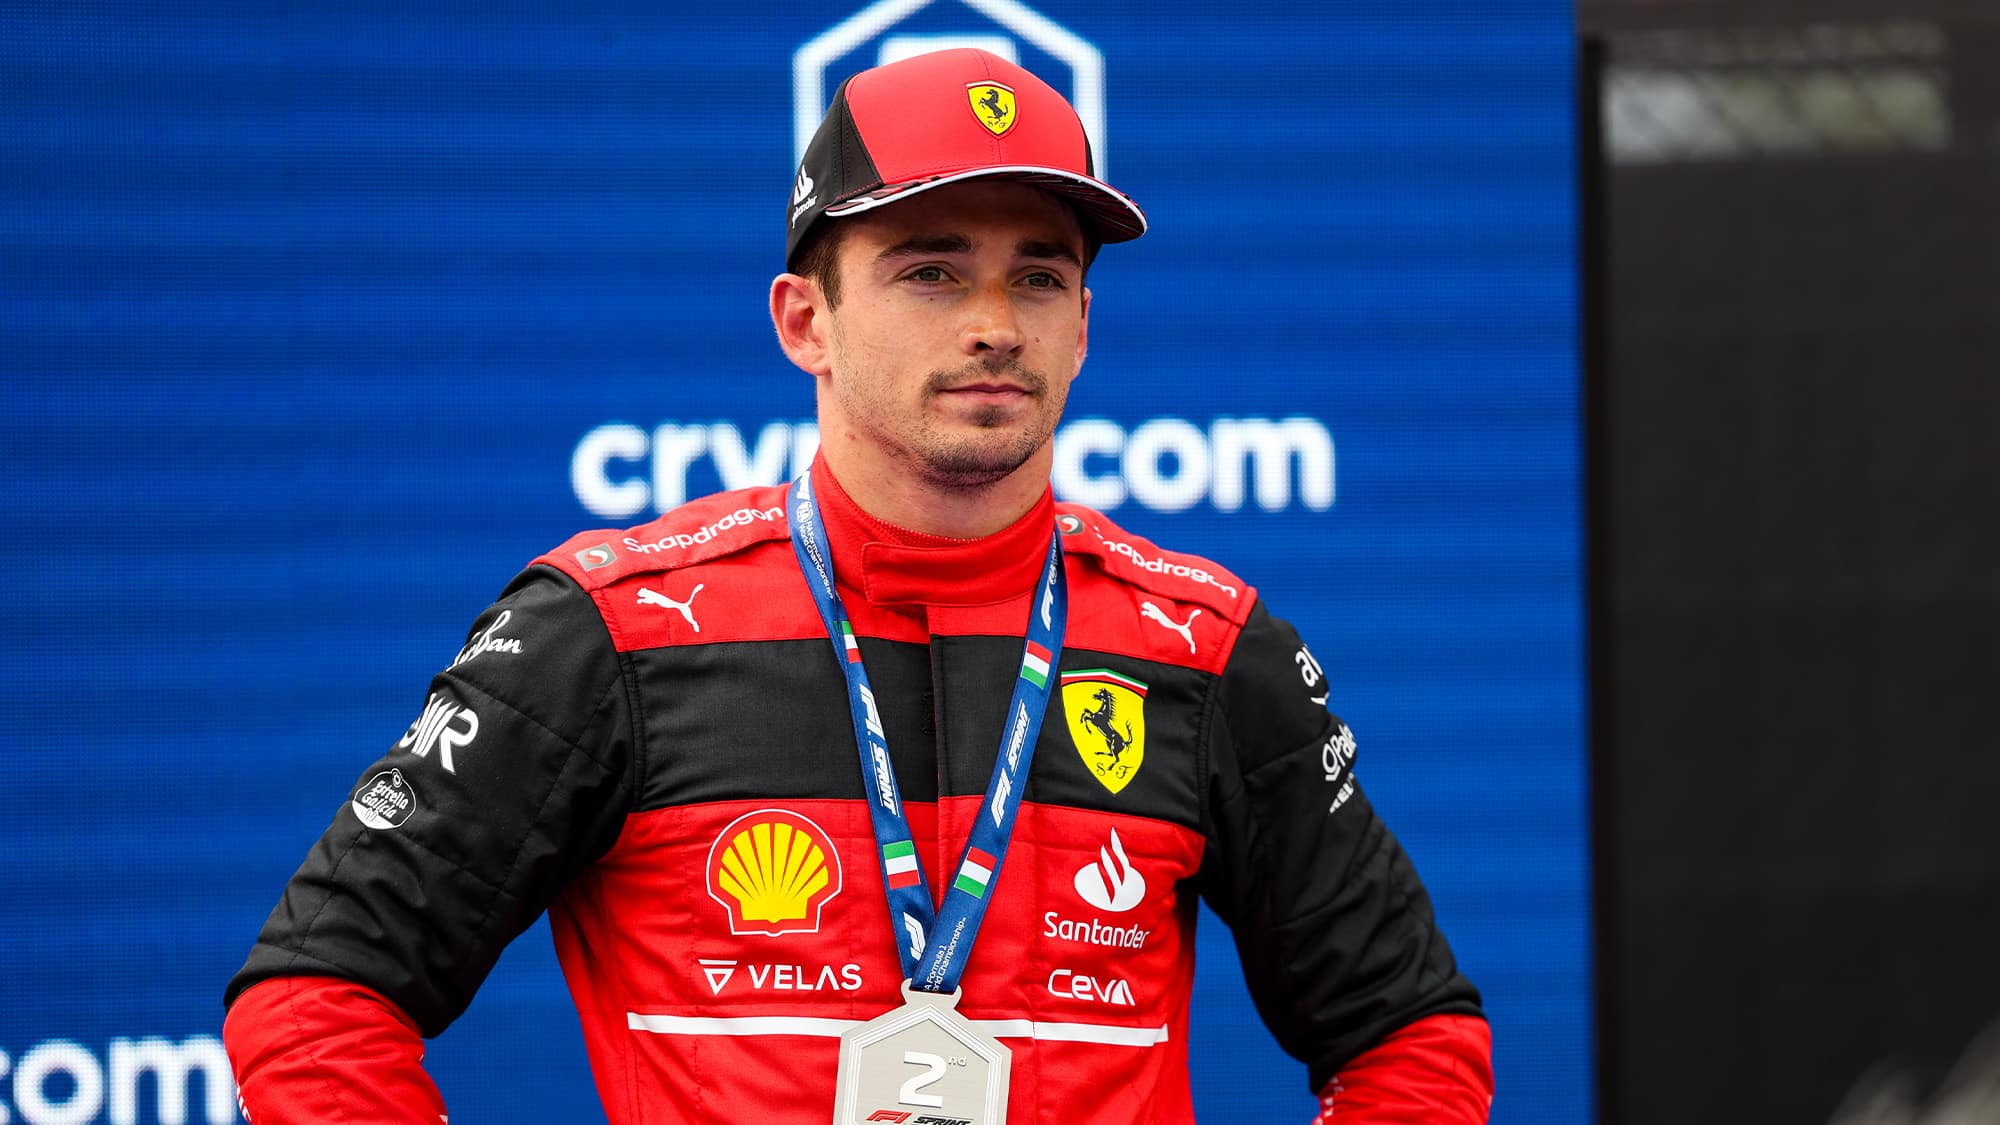 Charles Leclerc wearing second placed medal in 2022 Emilia Romagna sprint race